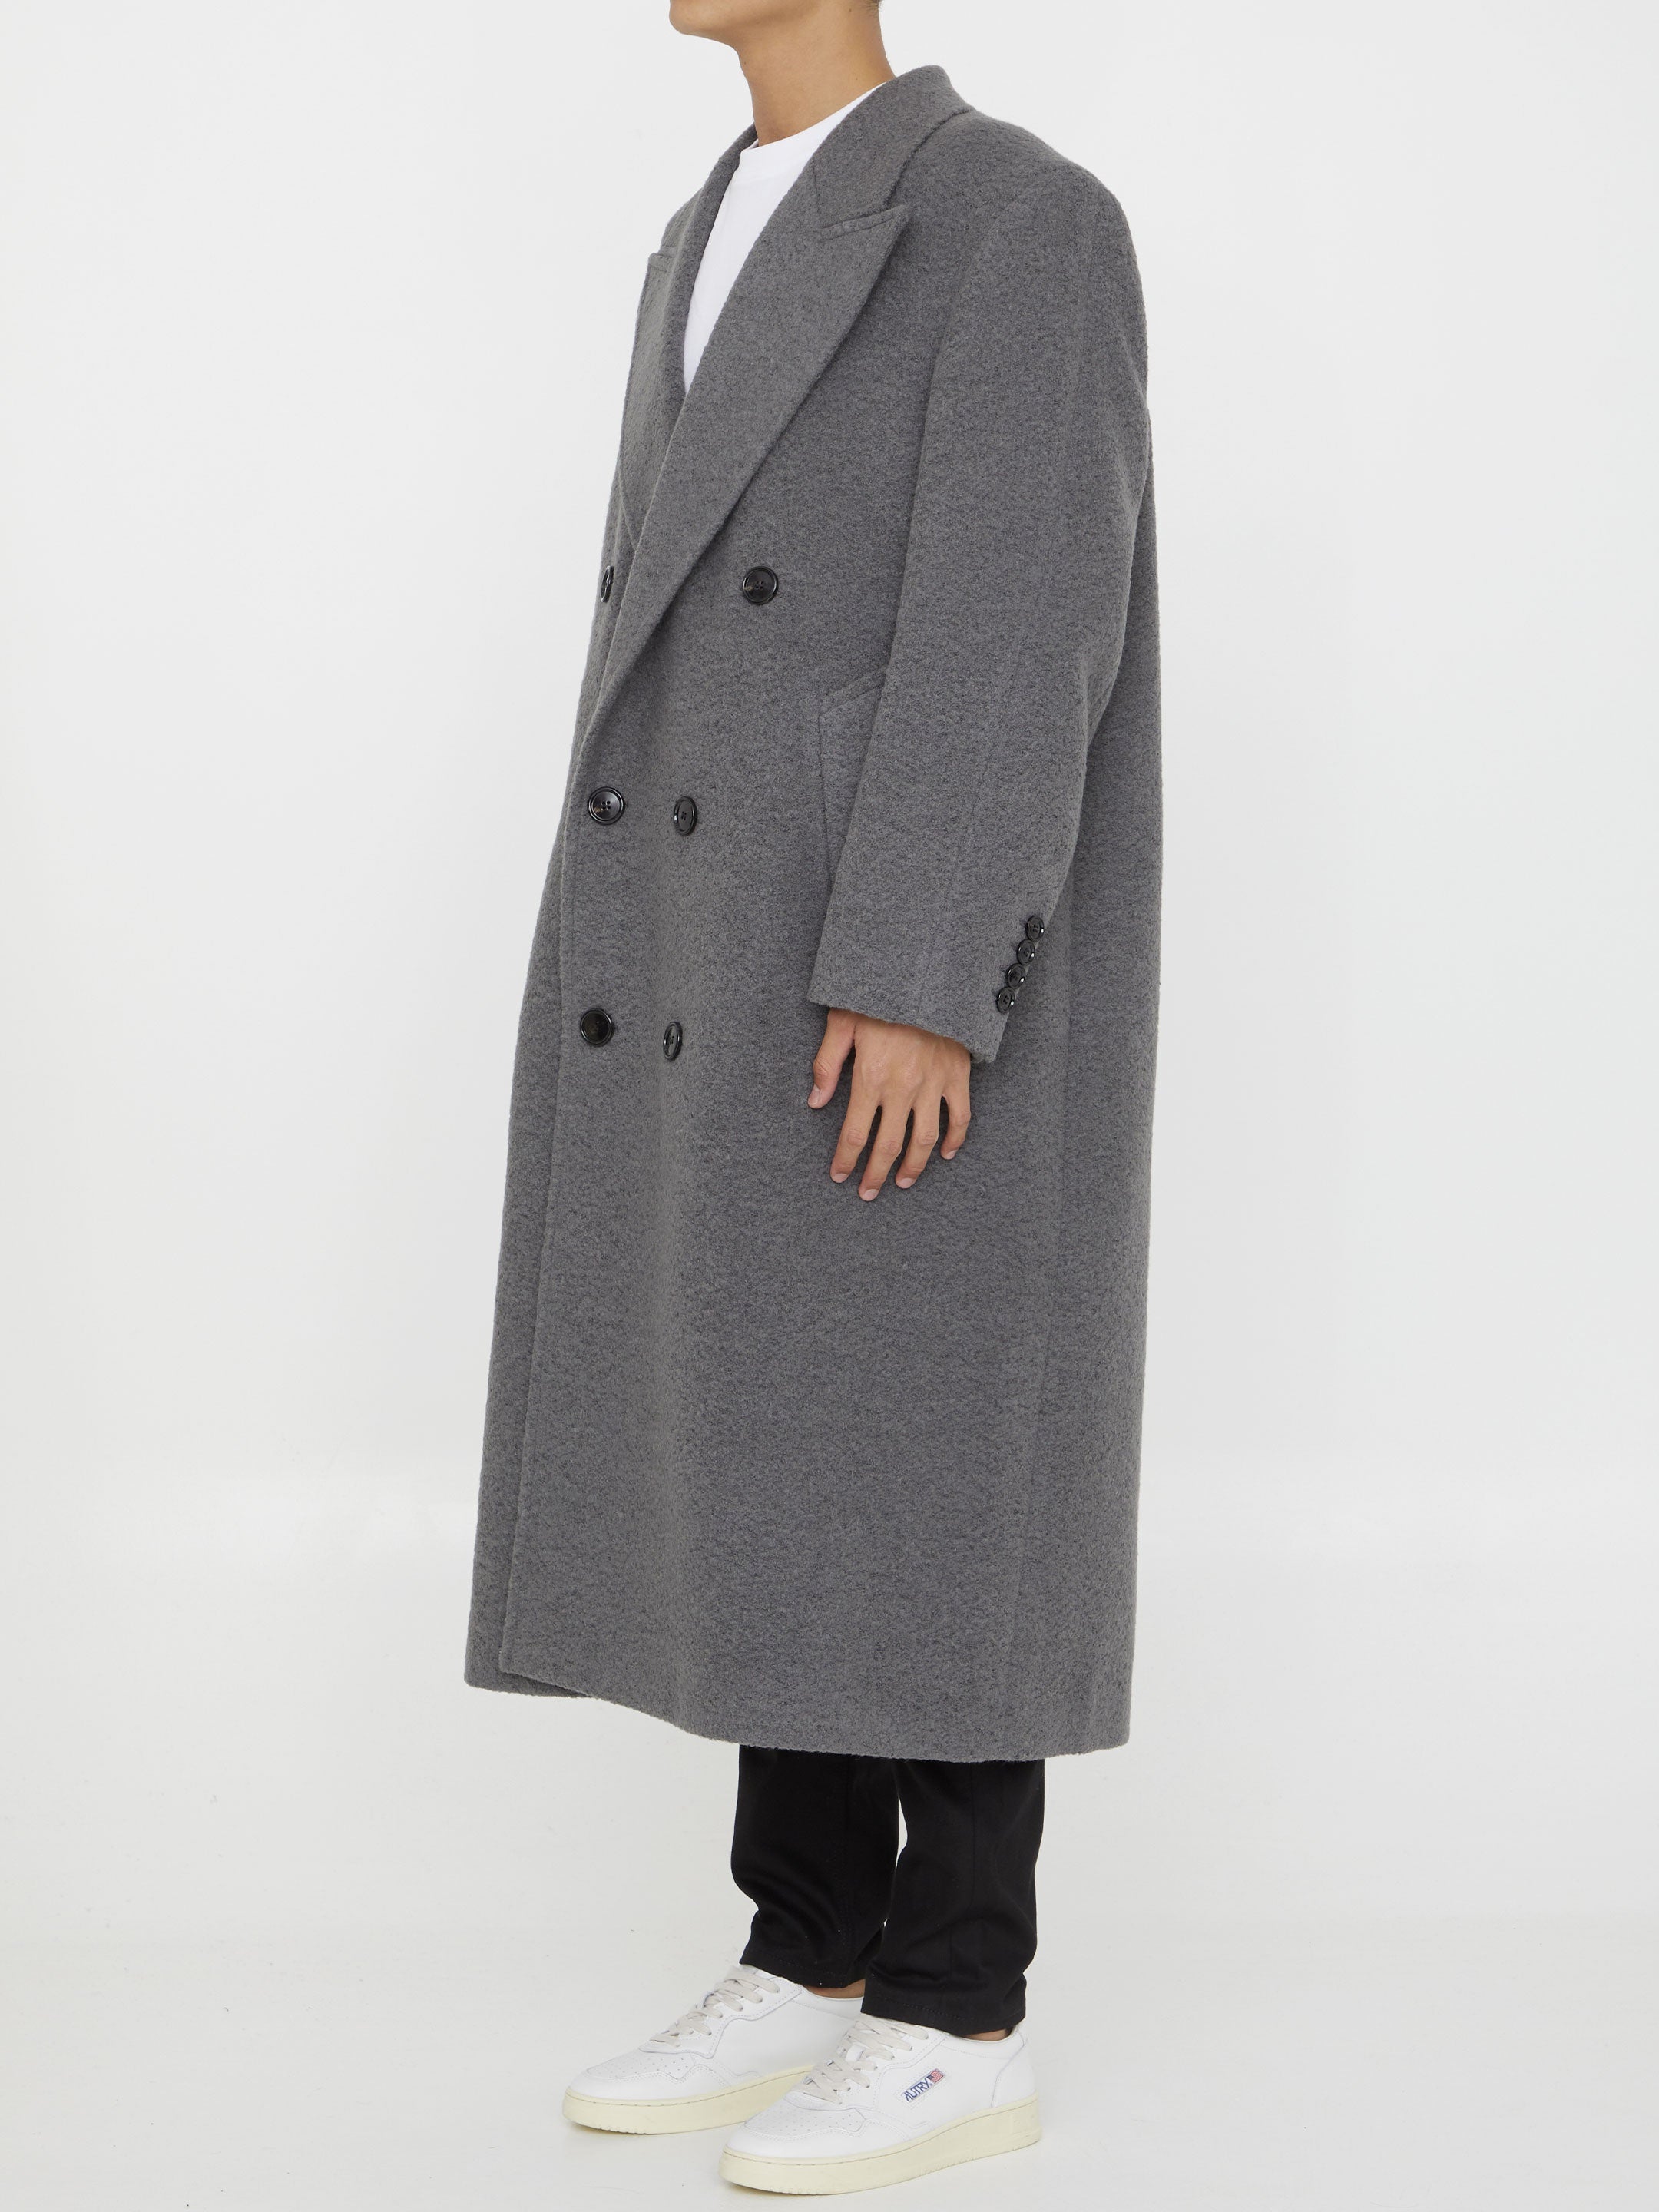 AMI-PARIS-OUTLET-SALE-Double-breasted-coat-Jacken-Mantel-48-GREY-ARCHIVE-COLLECTION-2.jpg